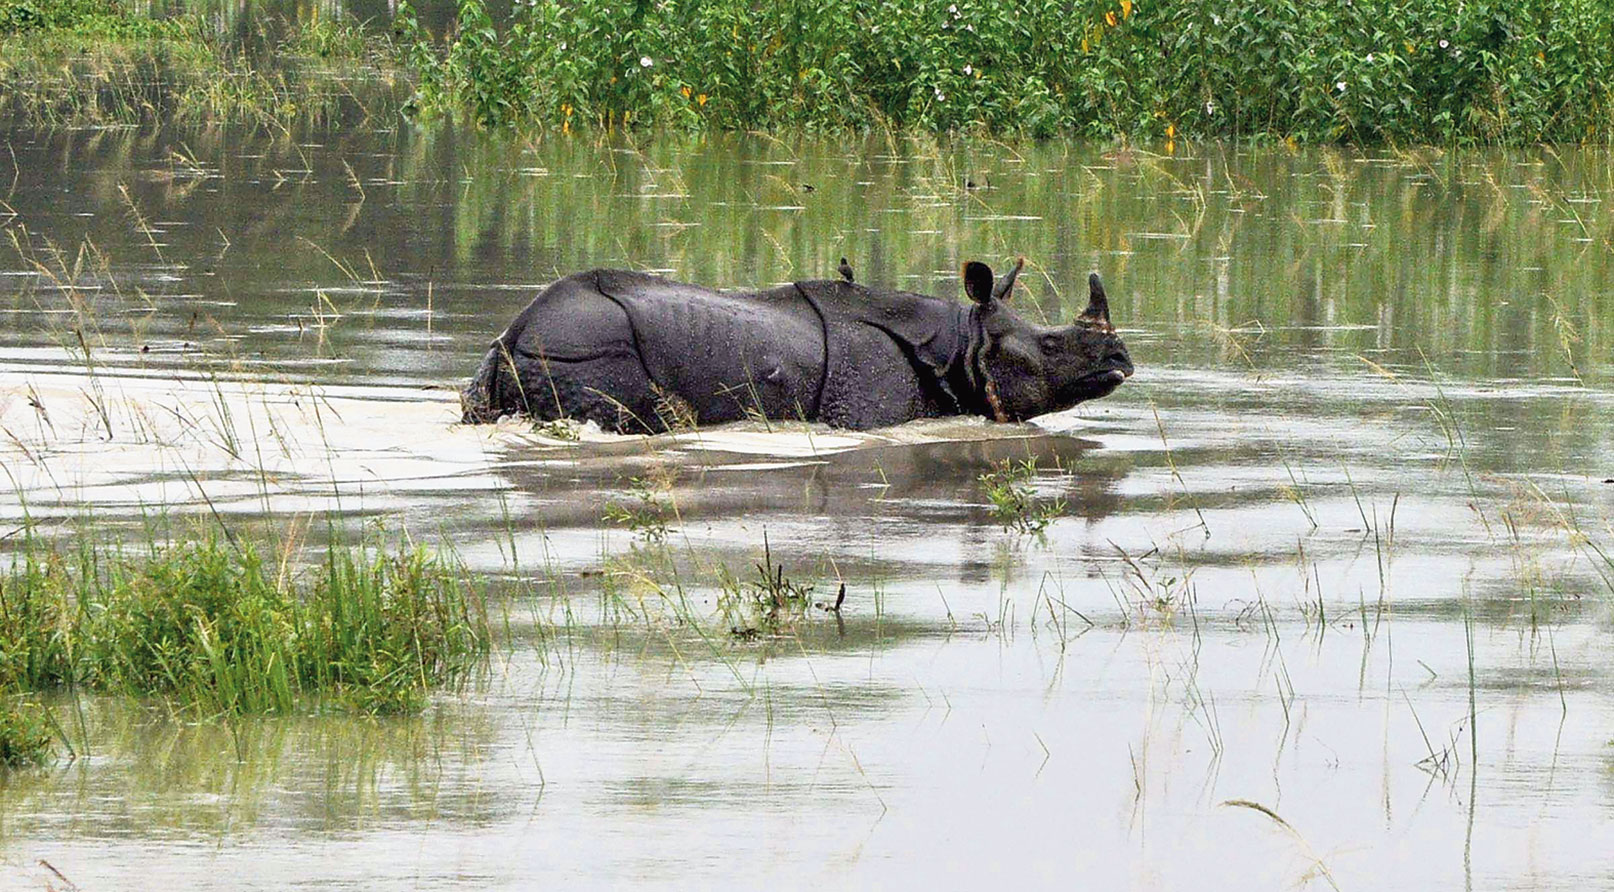 A rhino negotiates floodwaters in Pobitora wildlife sanctuary in Morigaon district of Assam.